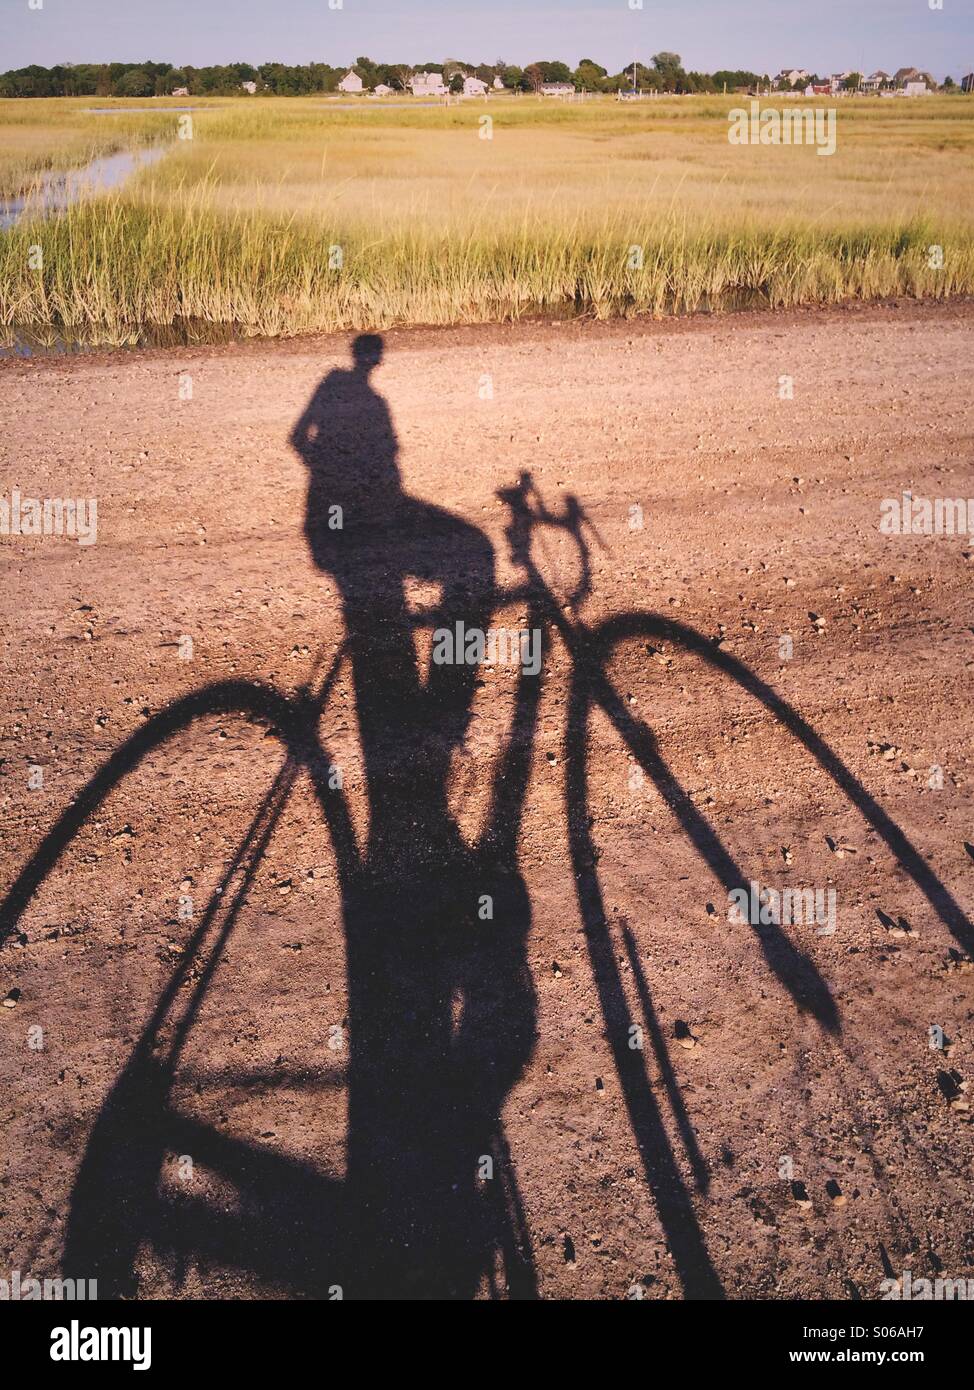 A shadow of a man on a bicycle on a dirt track in New England, USA. Stock Photo